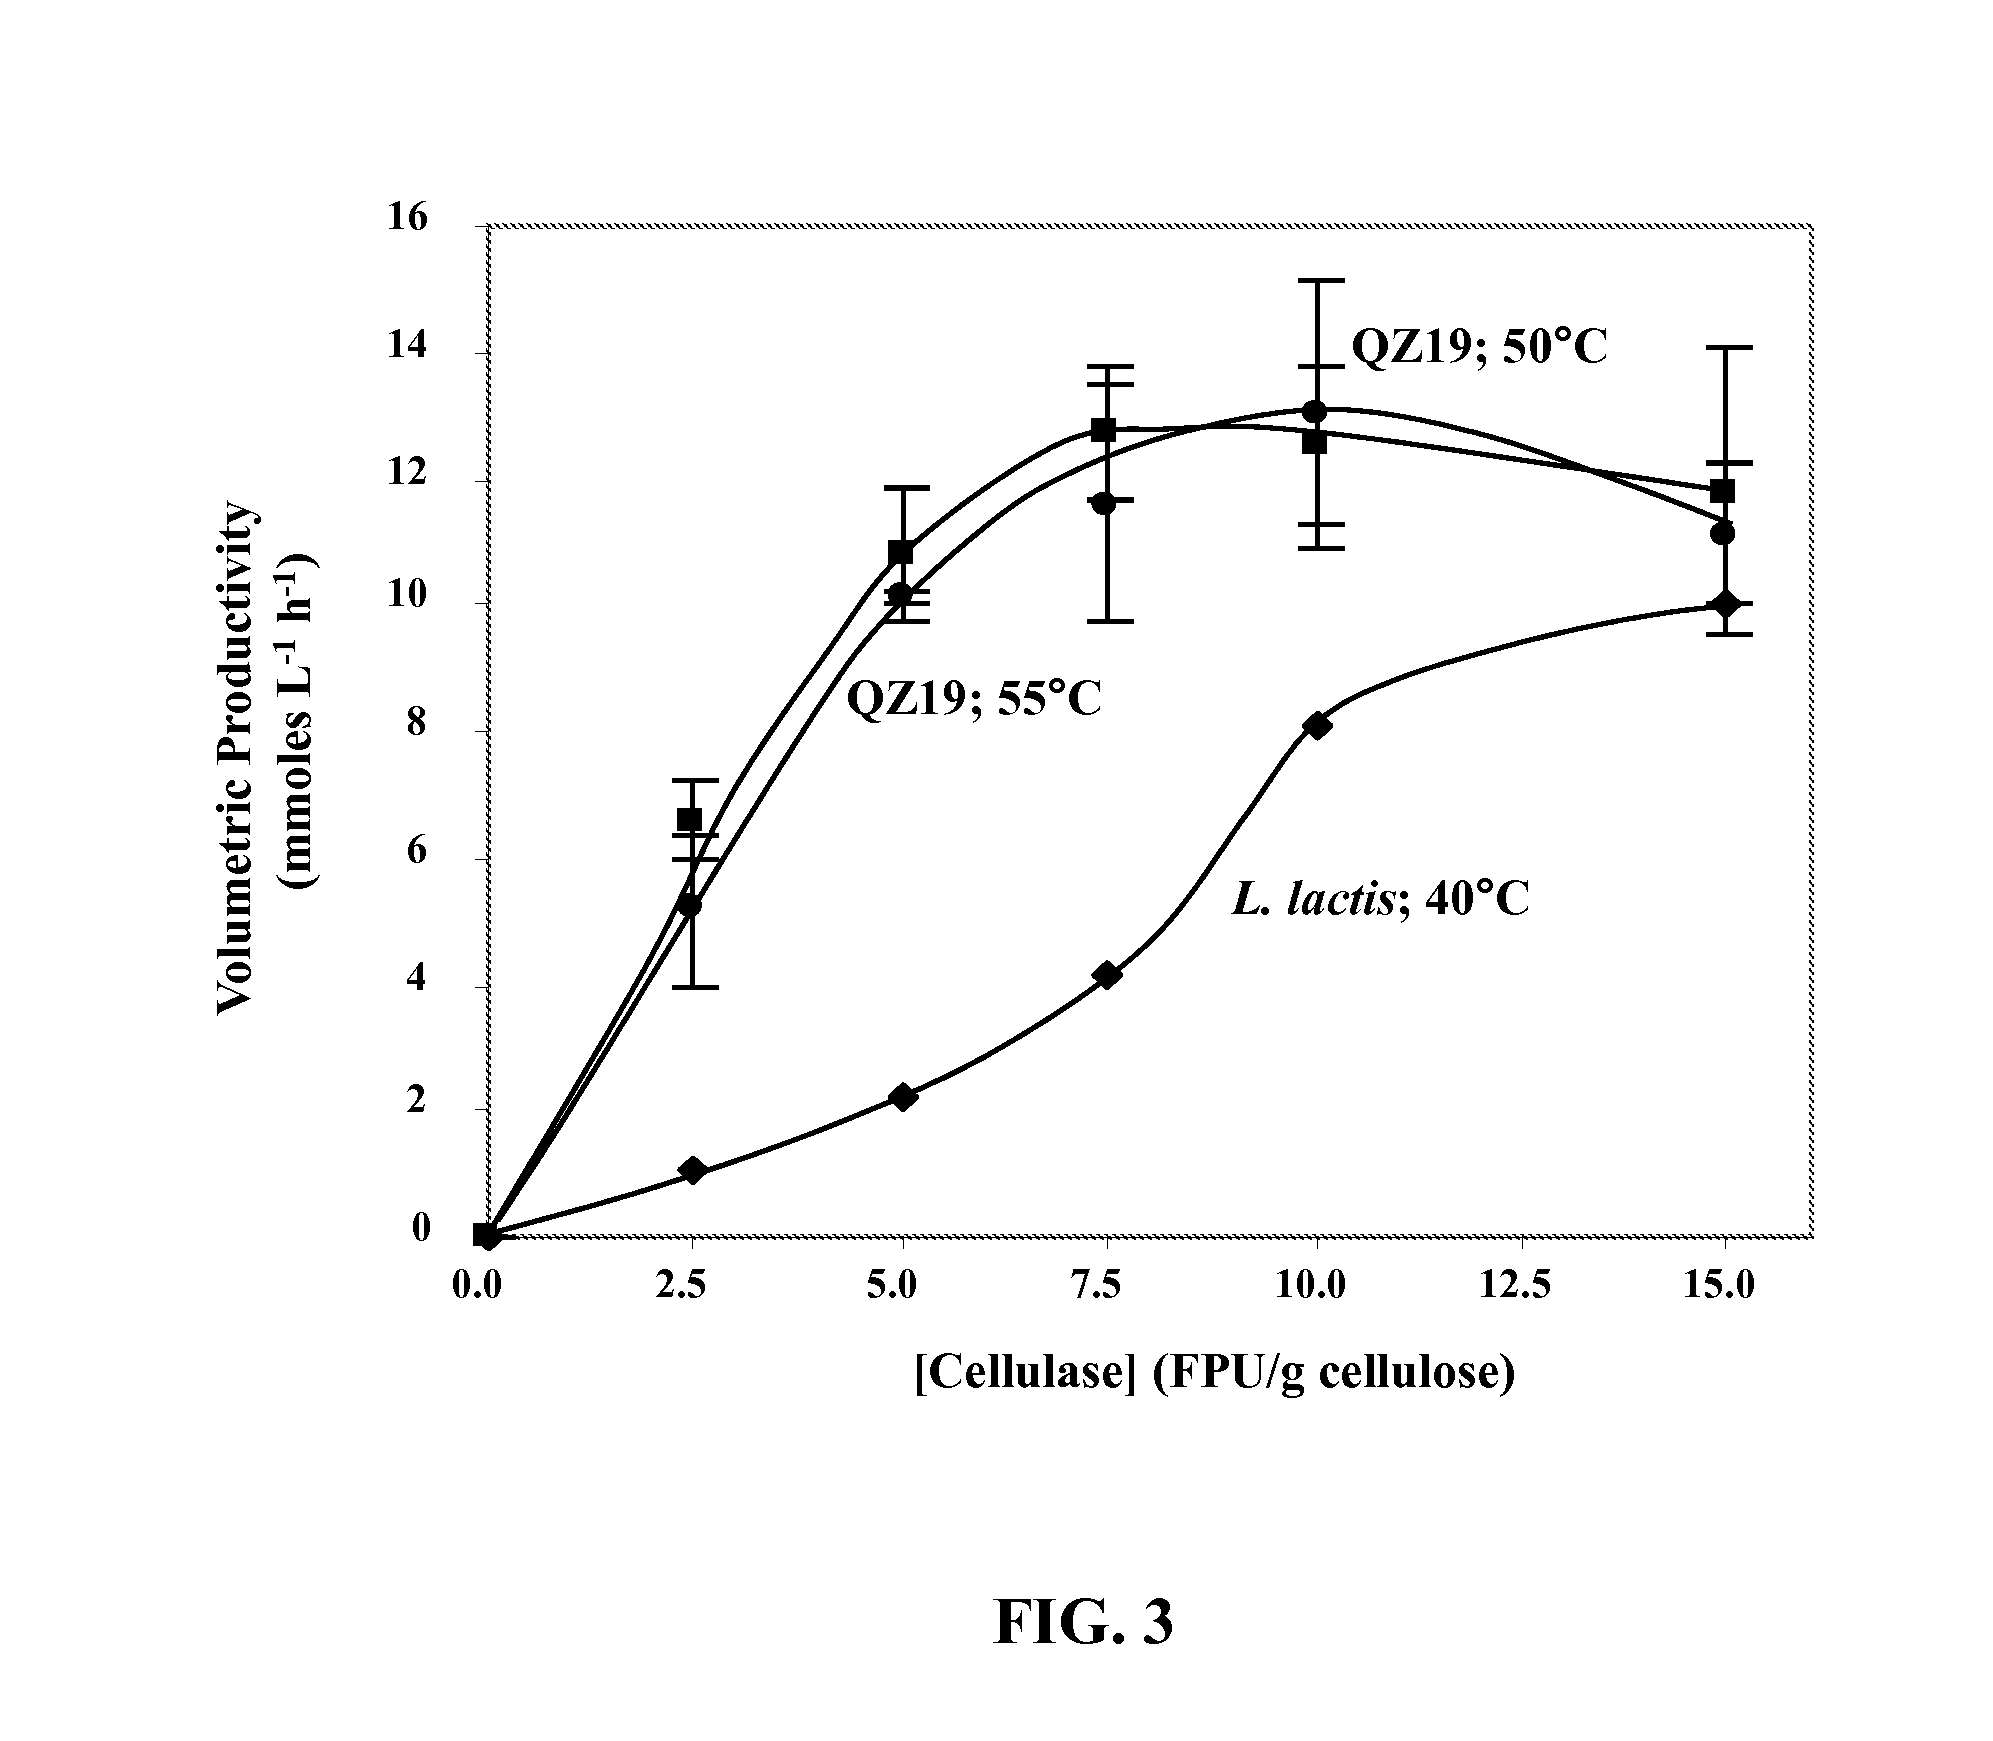 Variants of glycerol dehydrogenase having d-lactate dehydrogenase activity and uses thereof